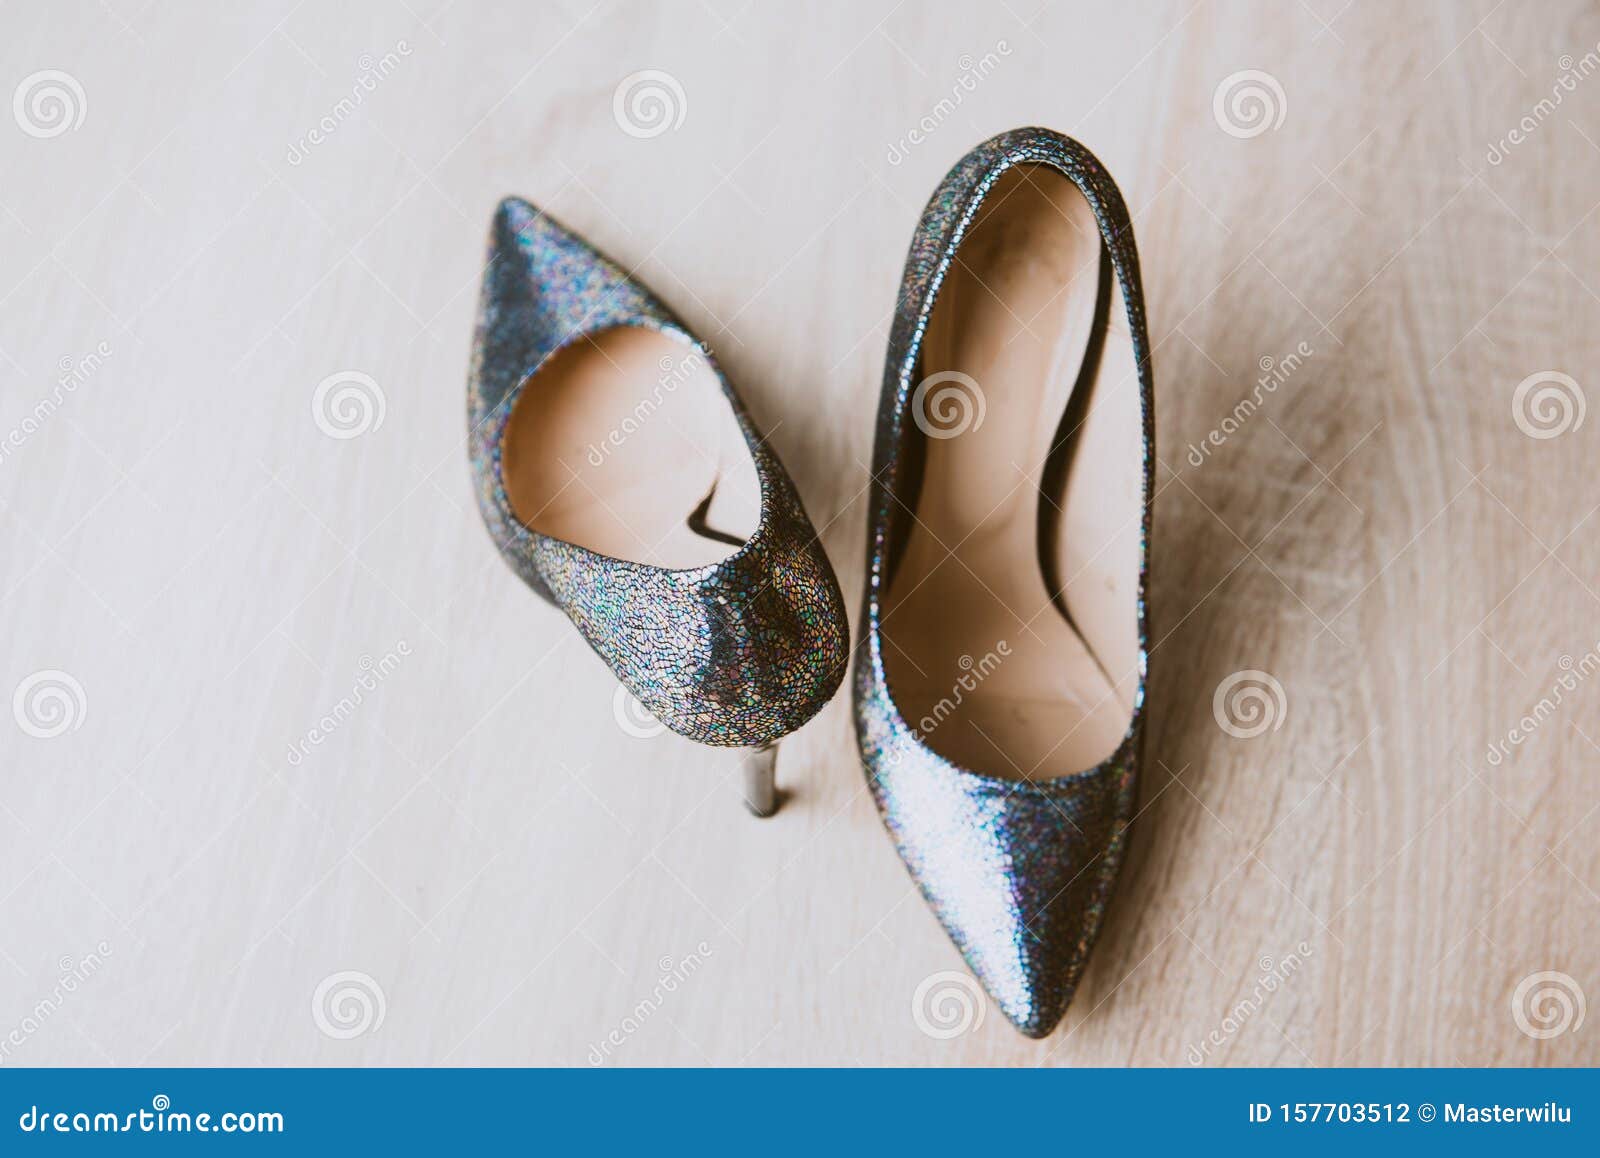 Black High Heel Women Shoes Isolated on Table Stock Photo - Image of ...